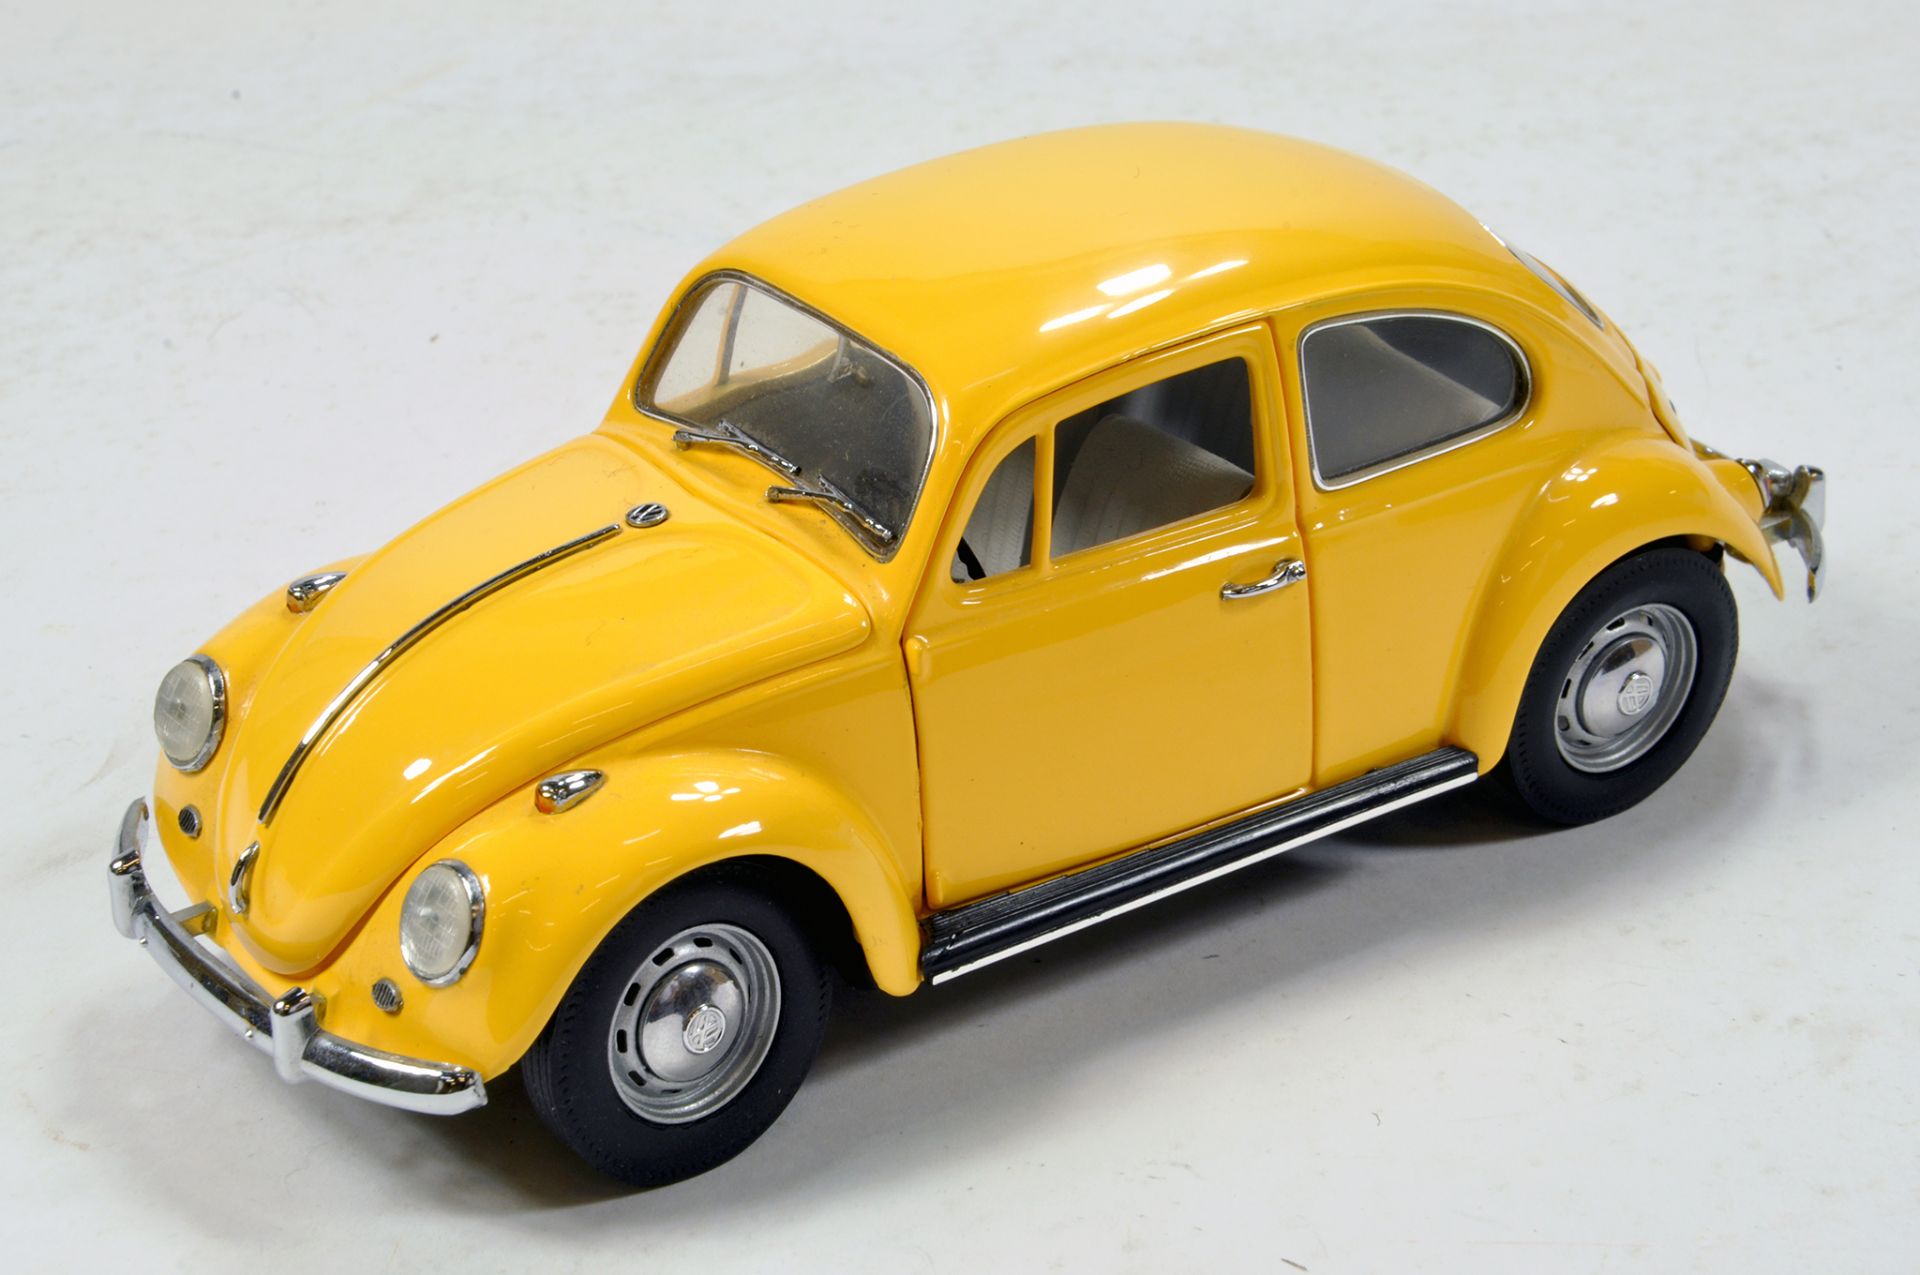 Franklin Mint 1/24 1967 Volkswagen Beetle. Impressive highly detailed piece that displays well hence